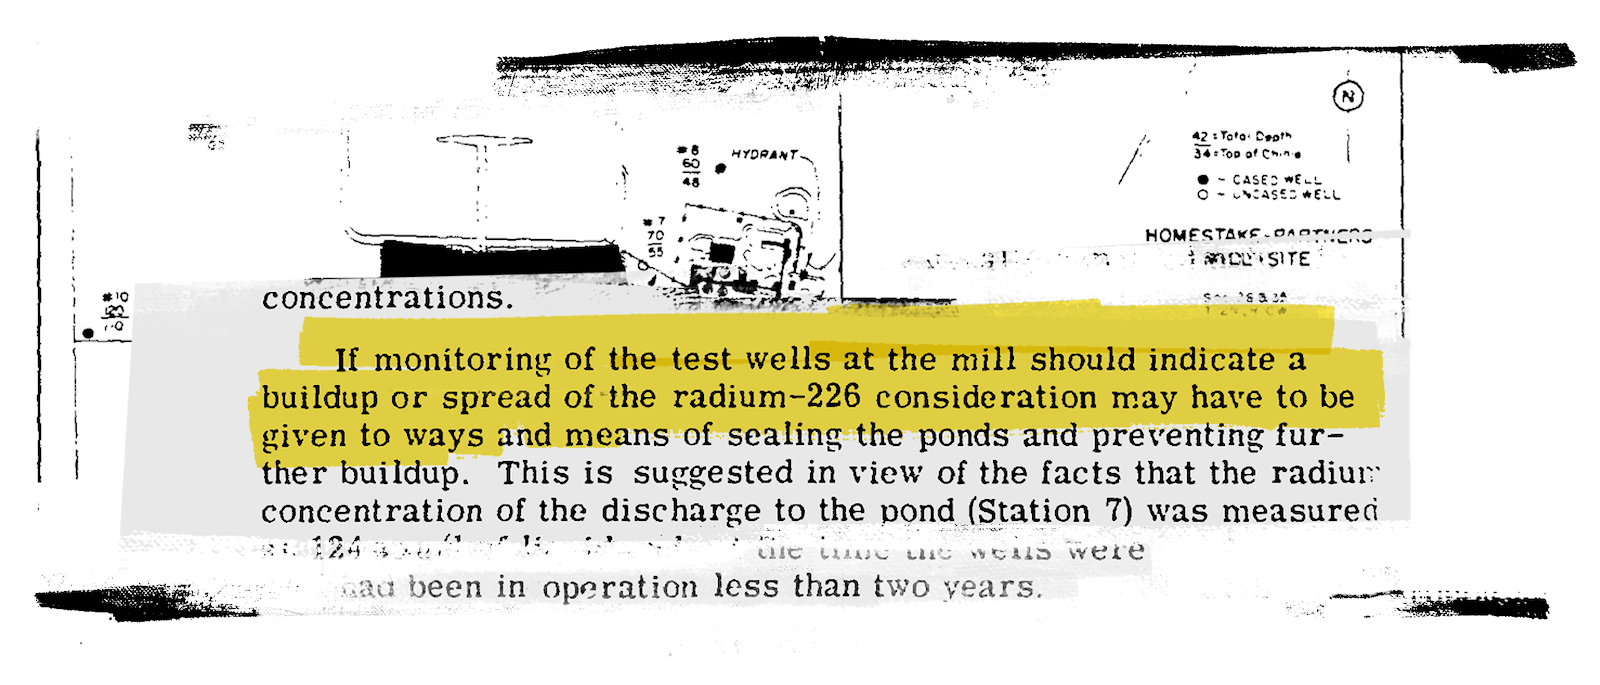 A small section of a report on the mines. It reads: ""If monitoring of the test wells at the mill should incigate a buildup or spread of the radium-266 considerating may be have to given to ways and means of sealing the ponds and preventing further buildup."